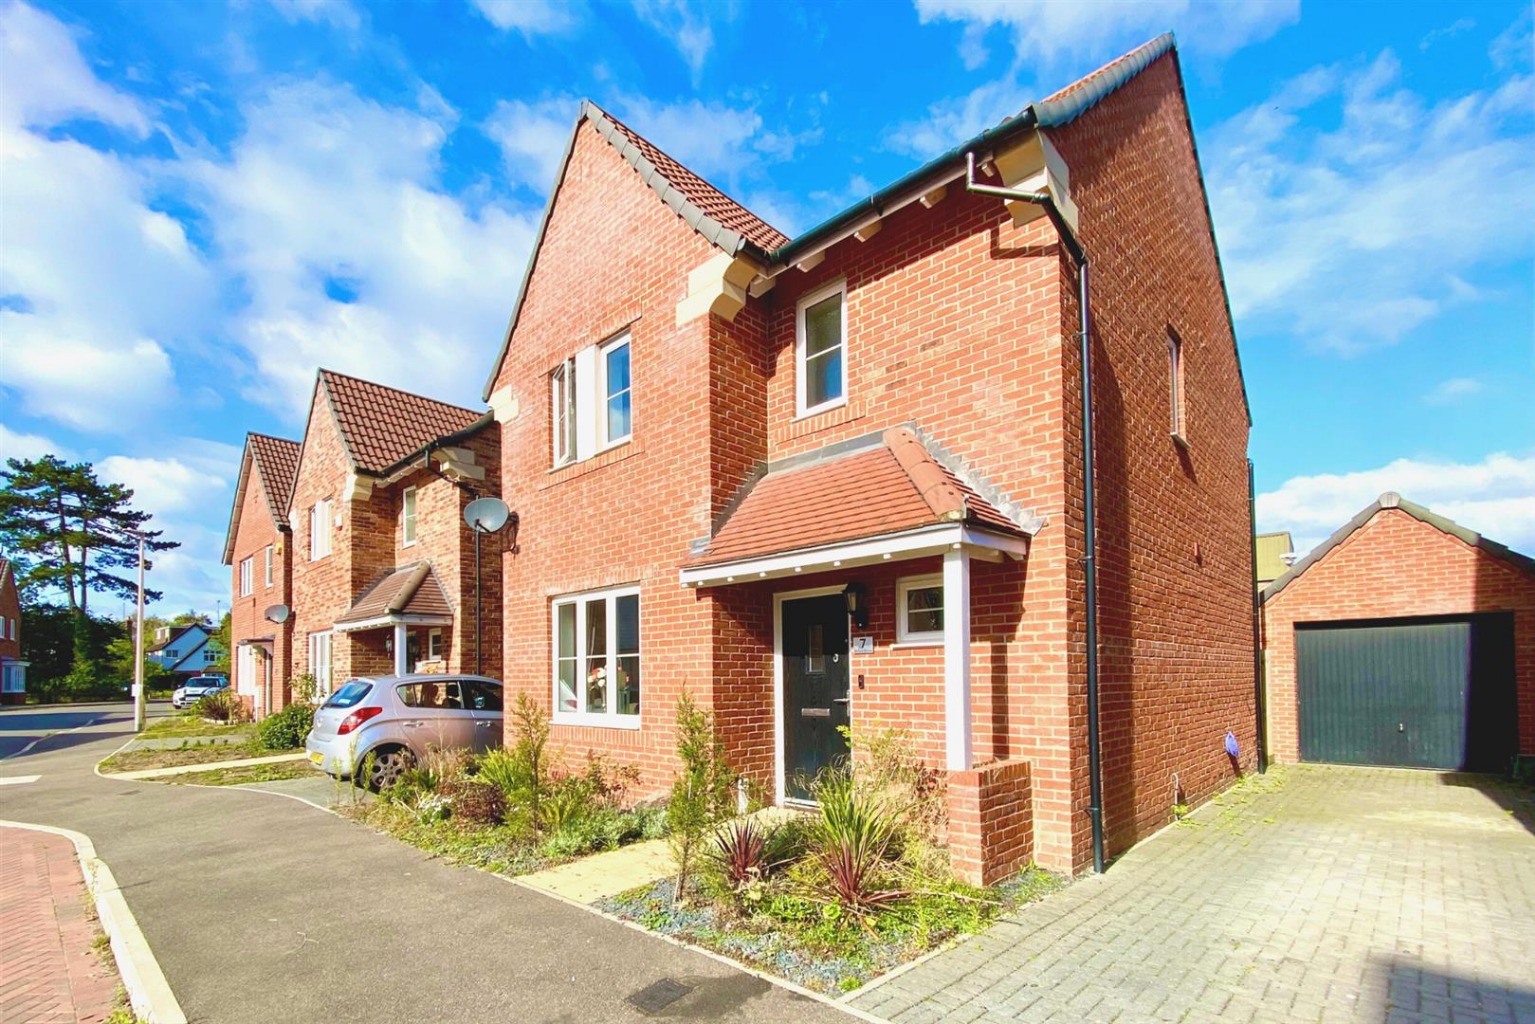 This is a stunning three bedroom detached home, built by Bloor Homes to the Whitfield design in 2016 and presented in good condition and we can't wait to show you around!